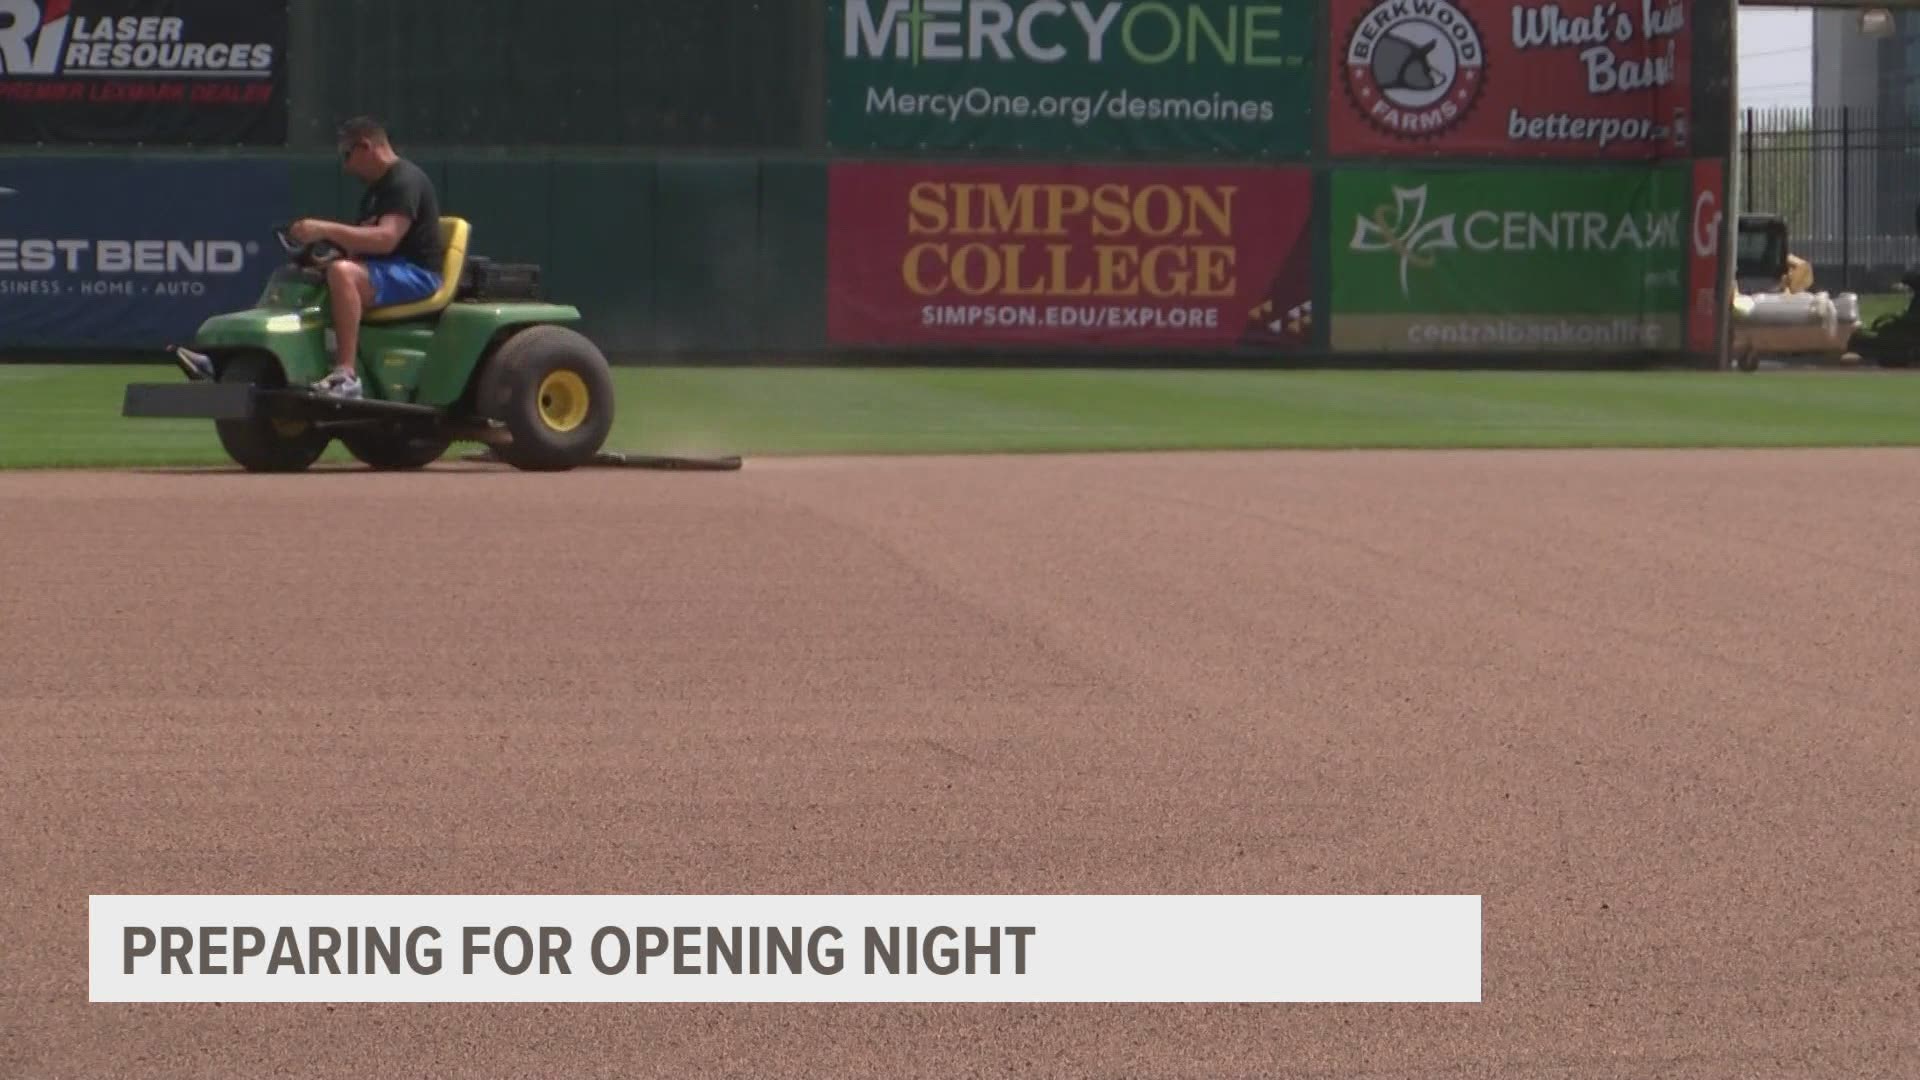 Workers and interns are making sure Principal Park is set up for opening night of the Iowa Cubs game.